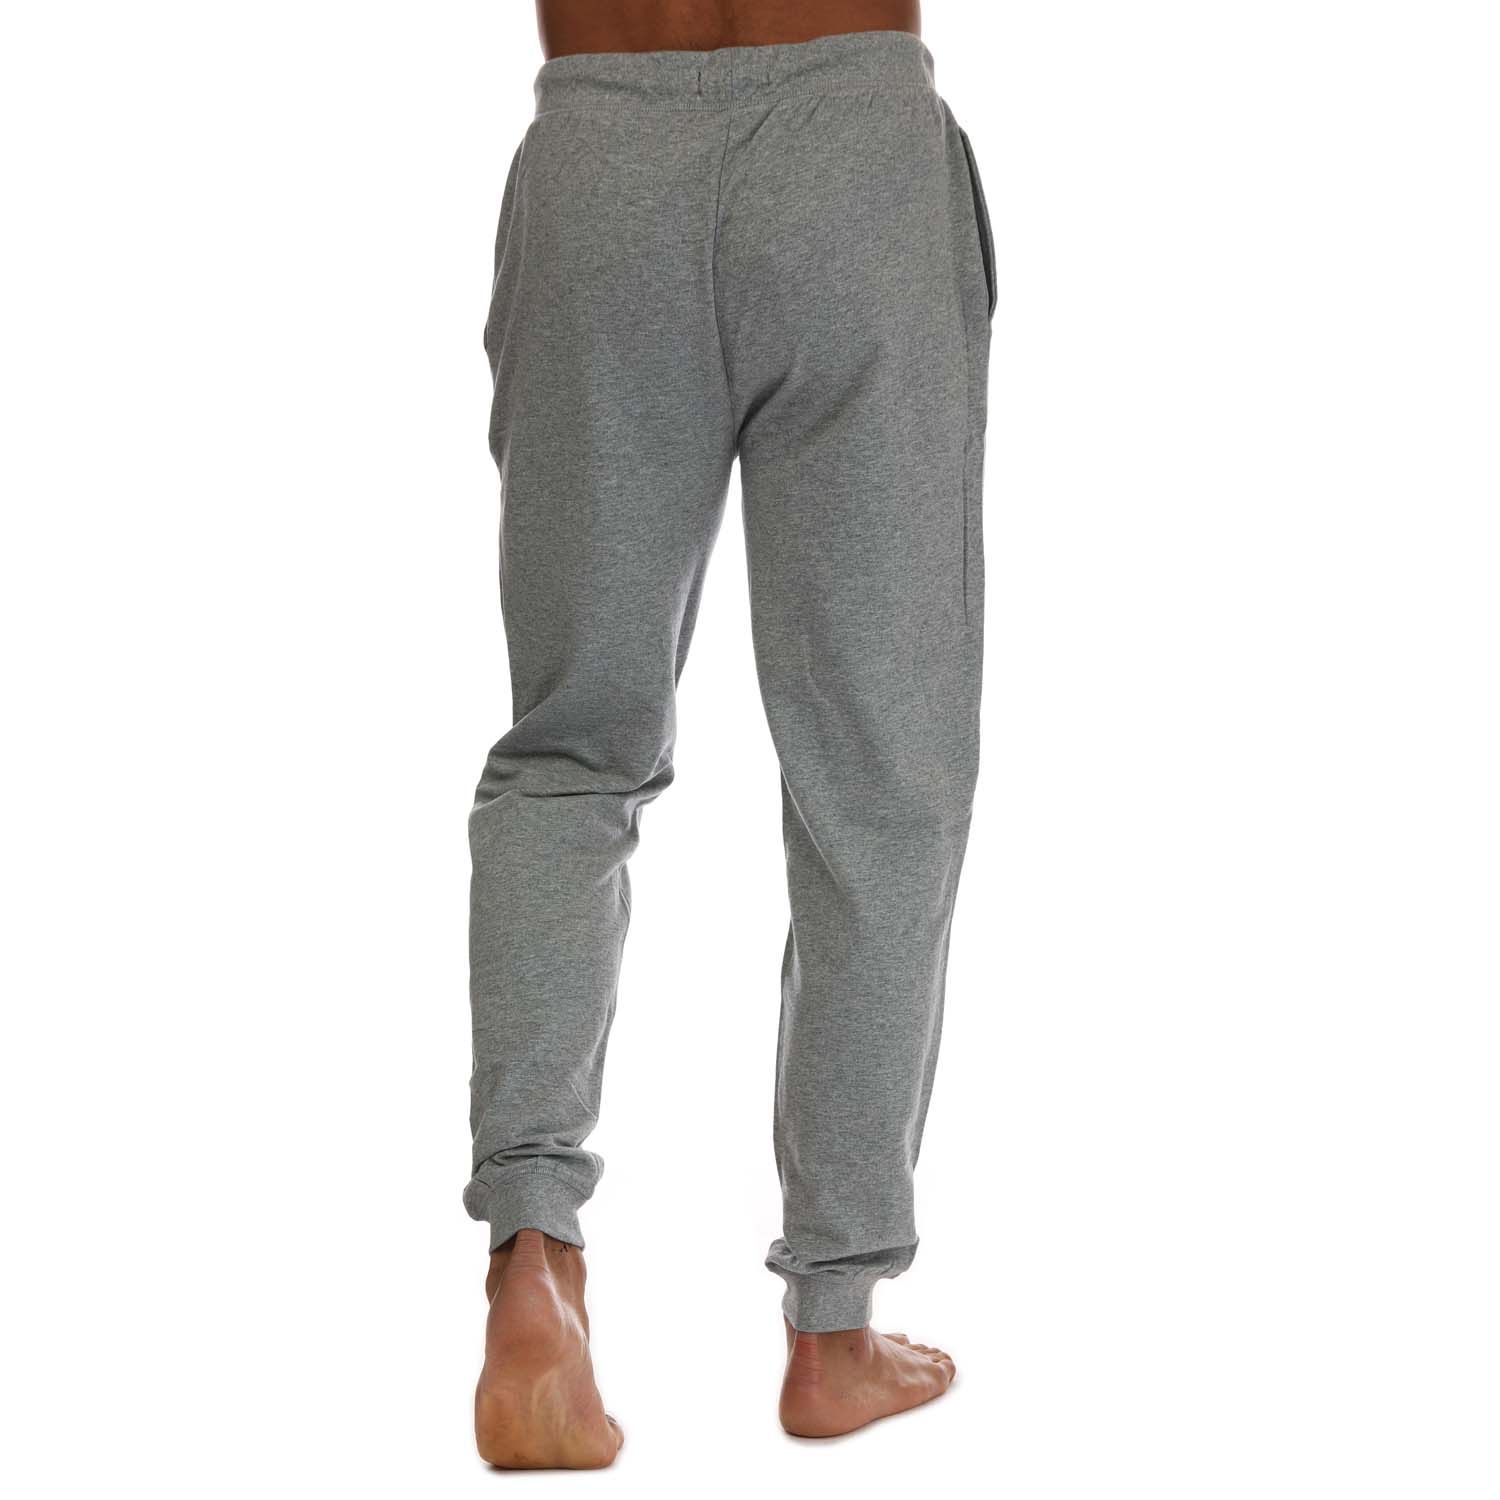 Grey Marl DKNY Mens Fisher Cats Lounge Pant - Get The Label